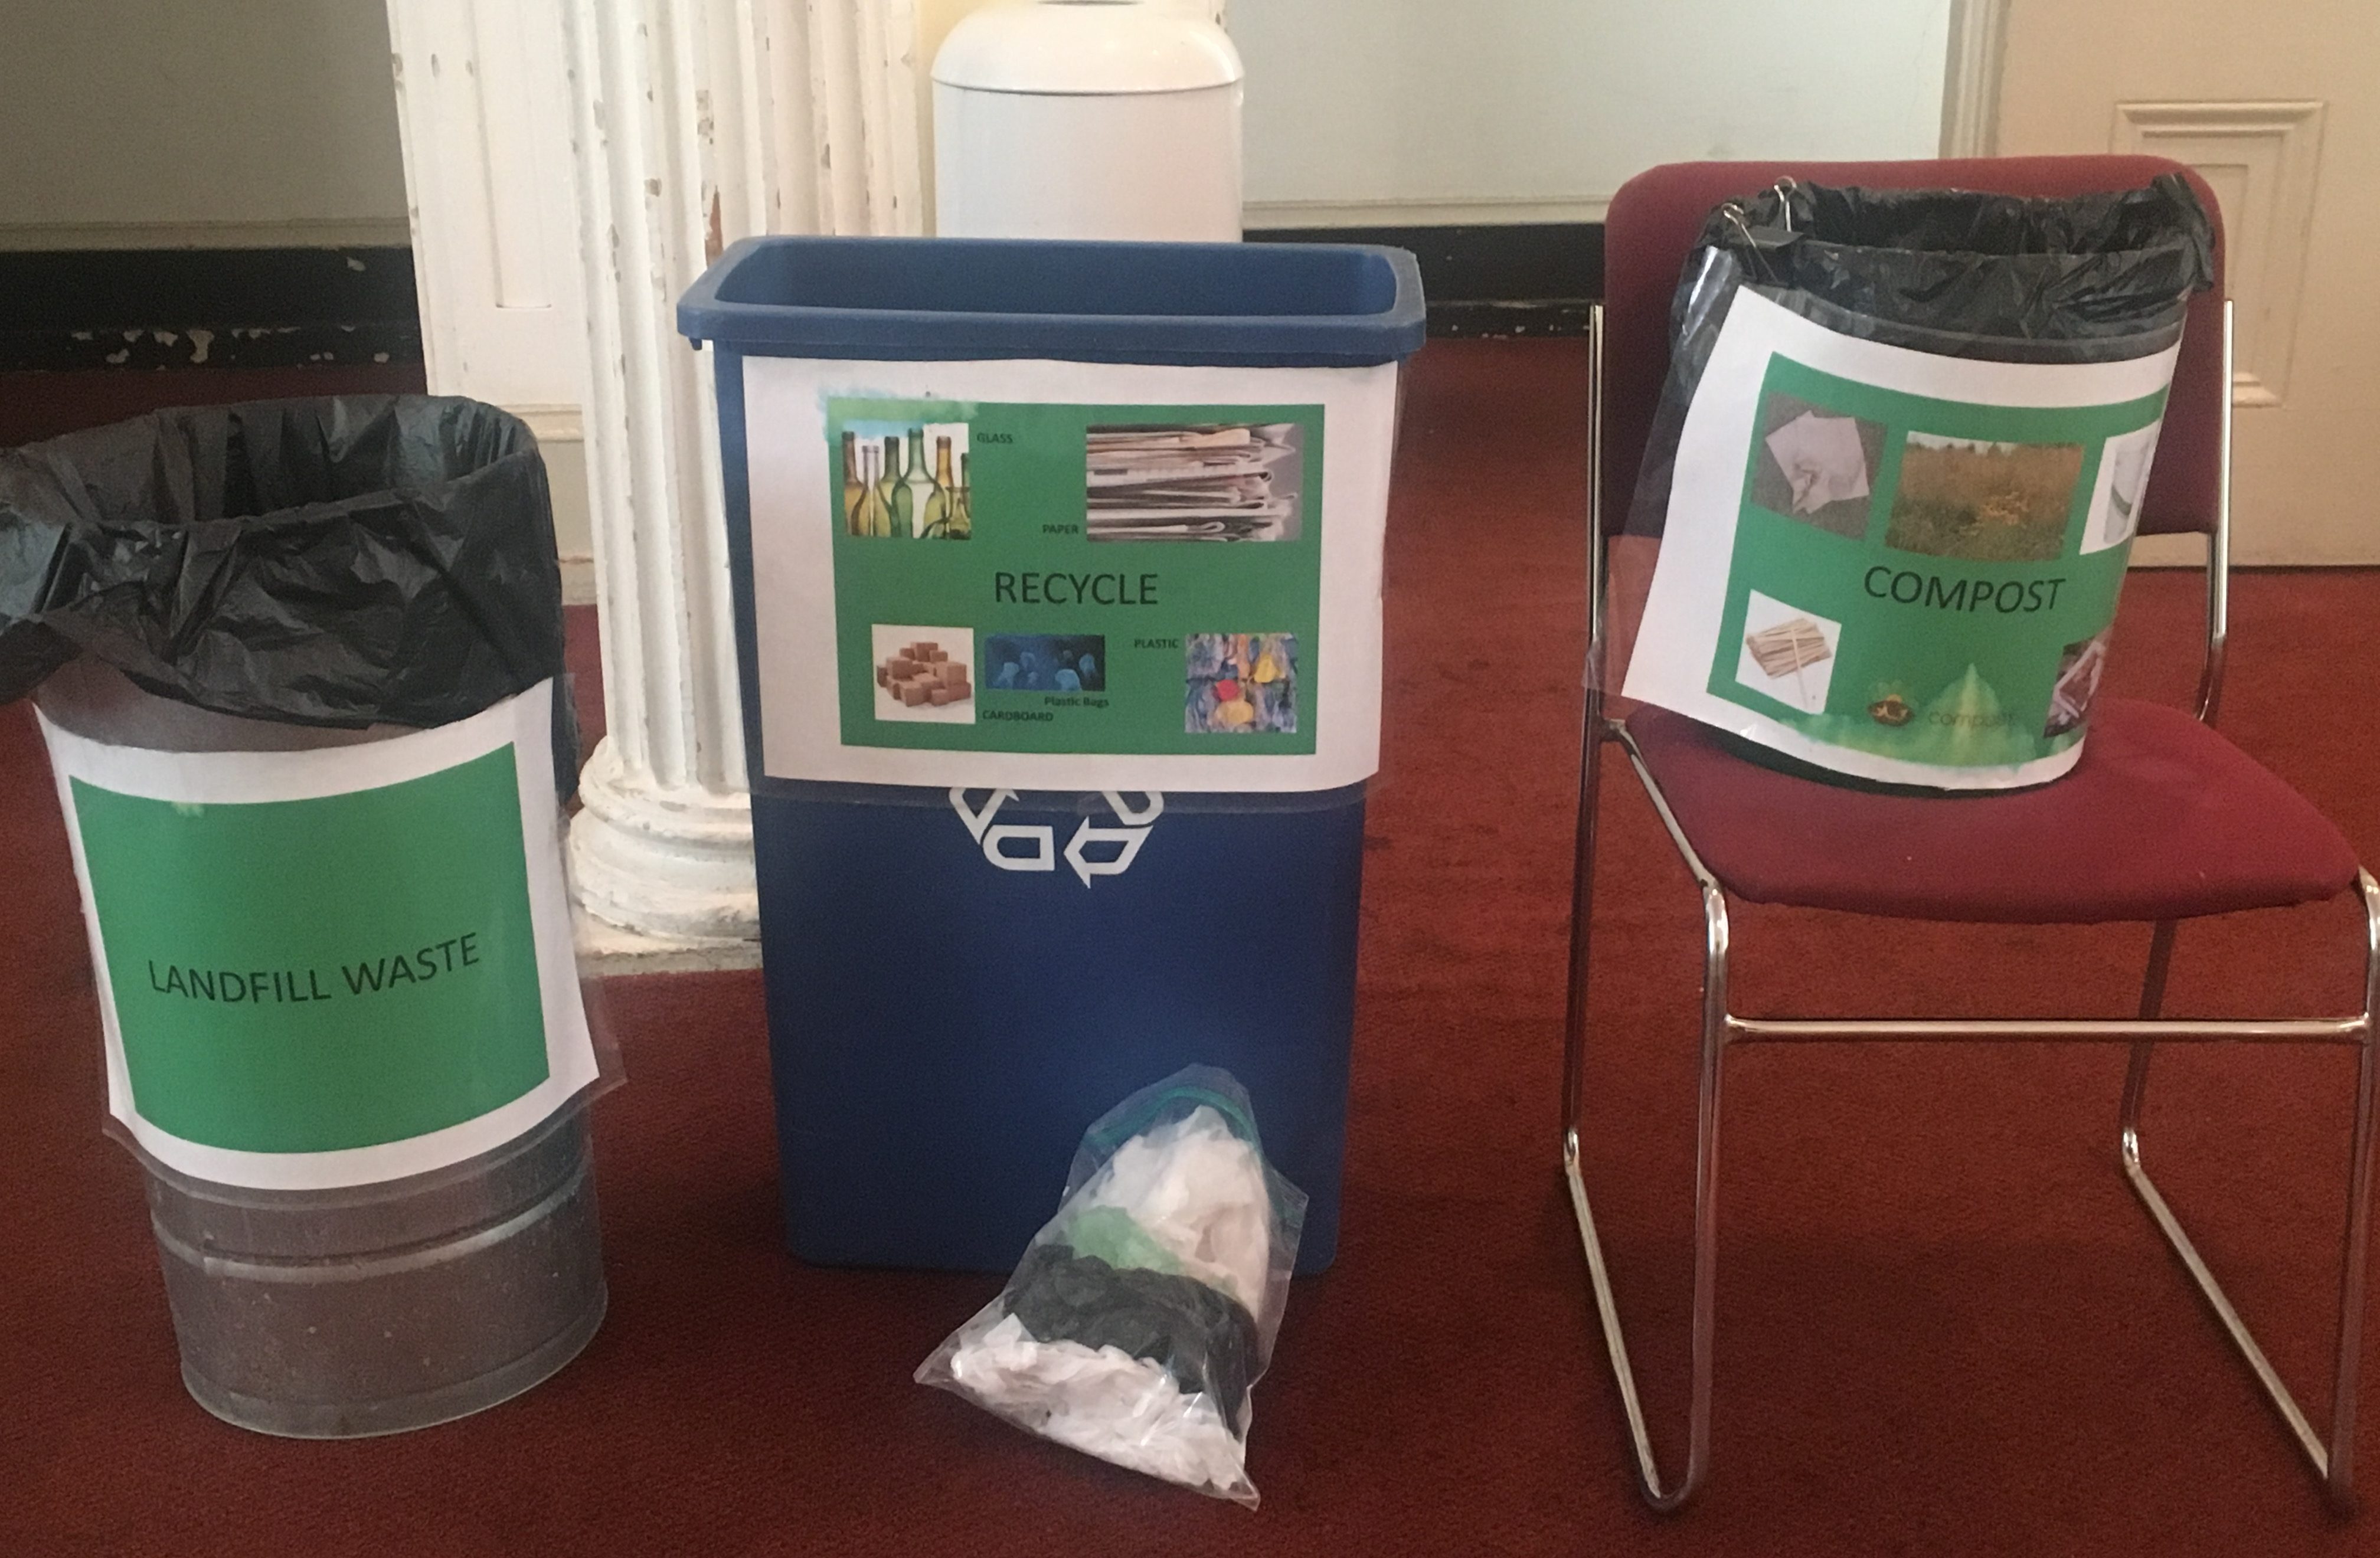 landfill waste, recycling bin, compost bin, and bag for plastic films